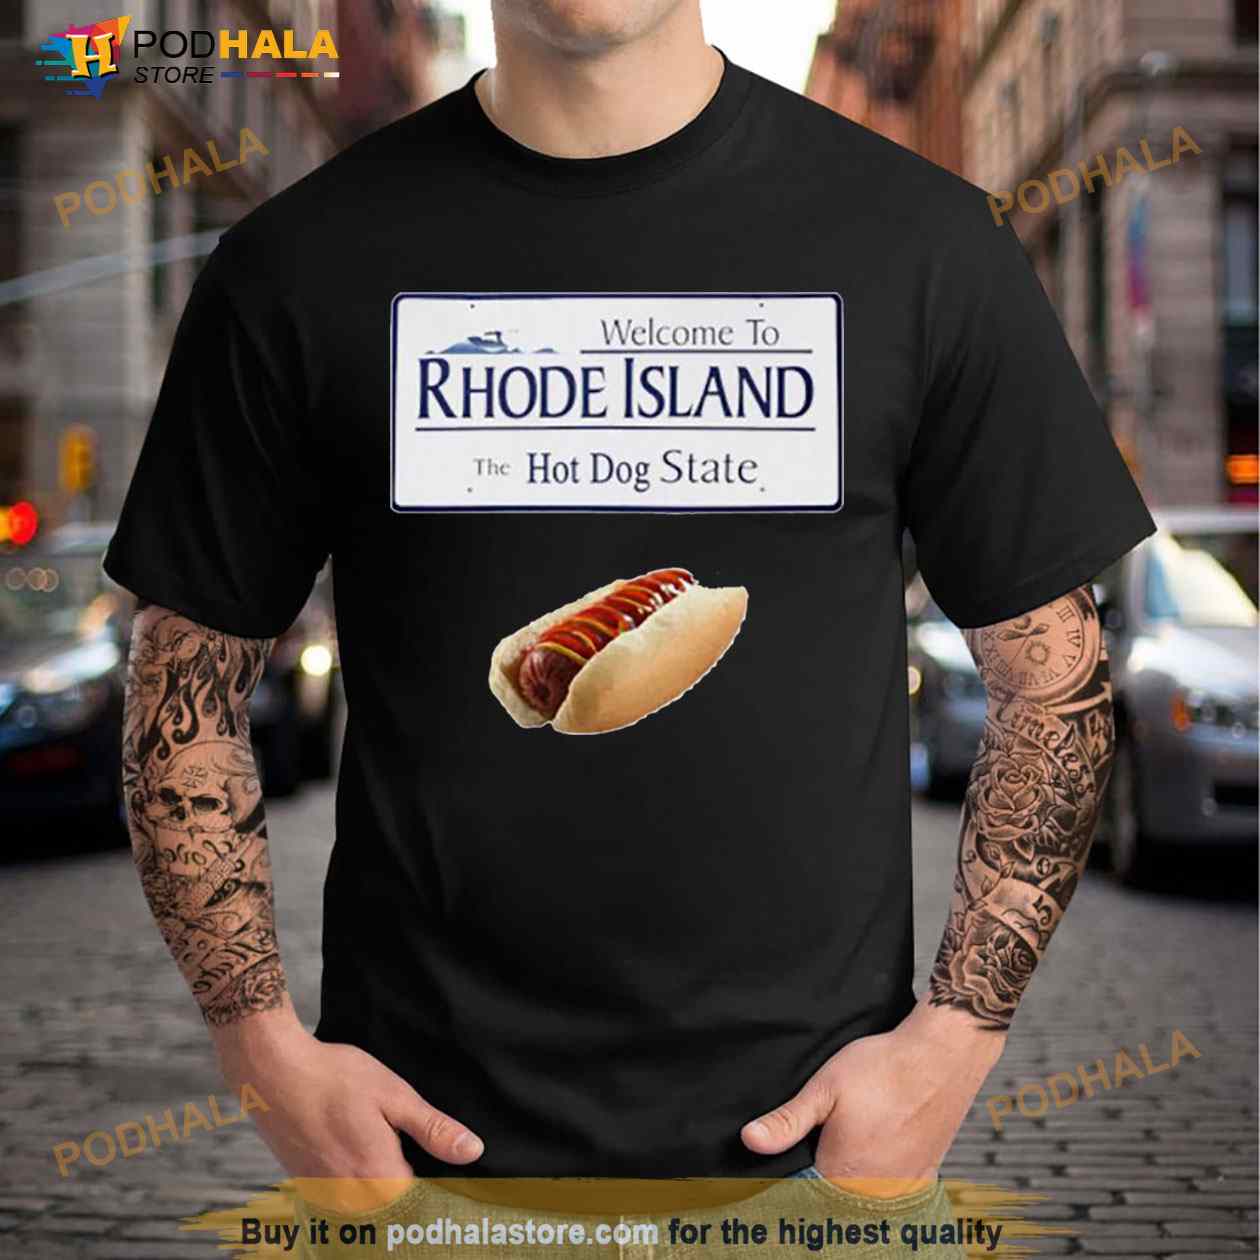 Welcome to Rhode Island the hot dog state Shirt - Bring Your Ideas